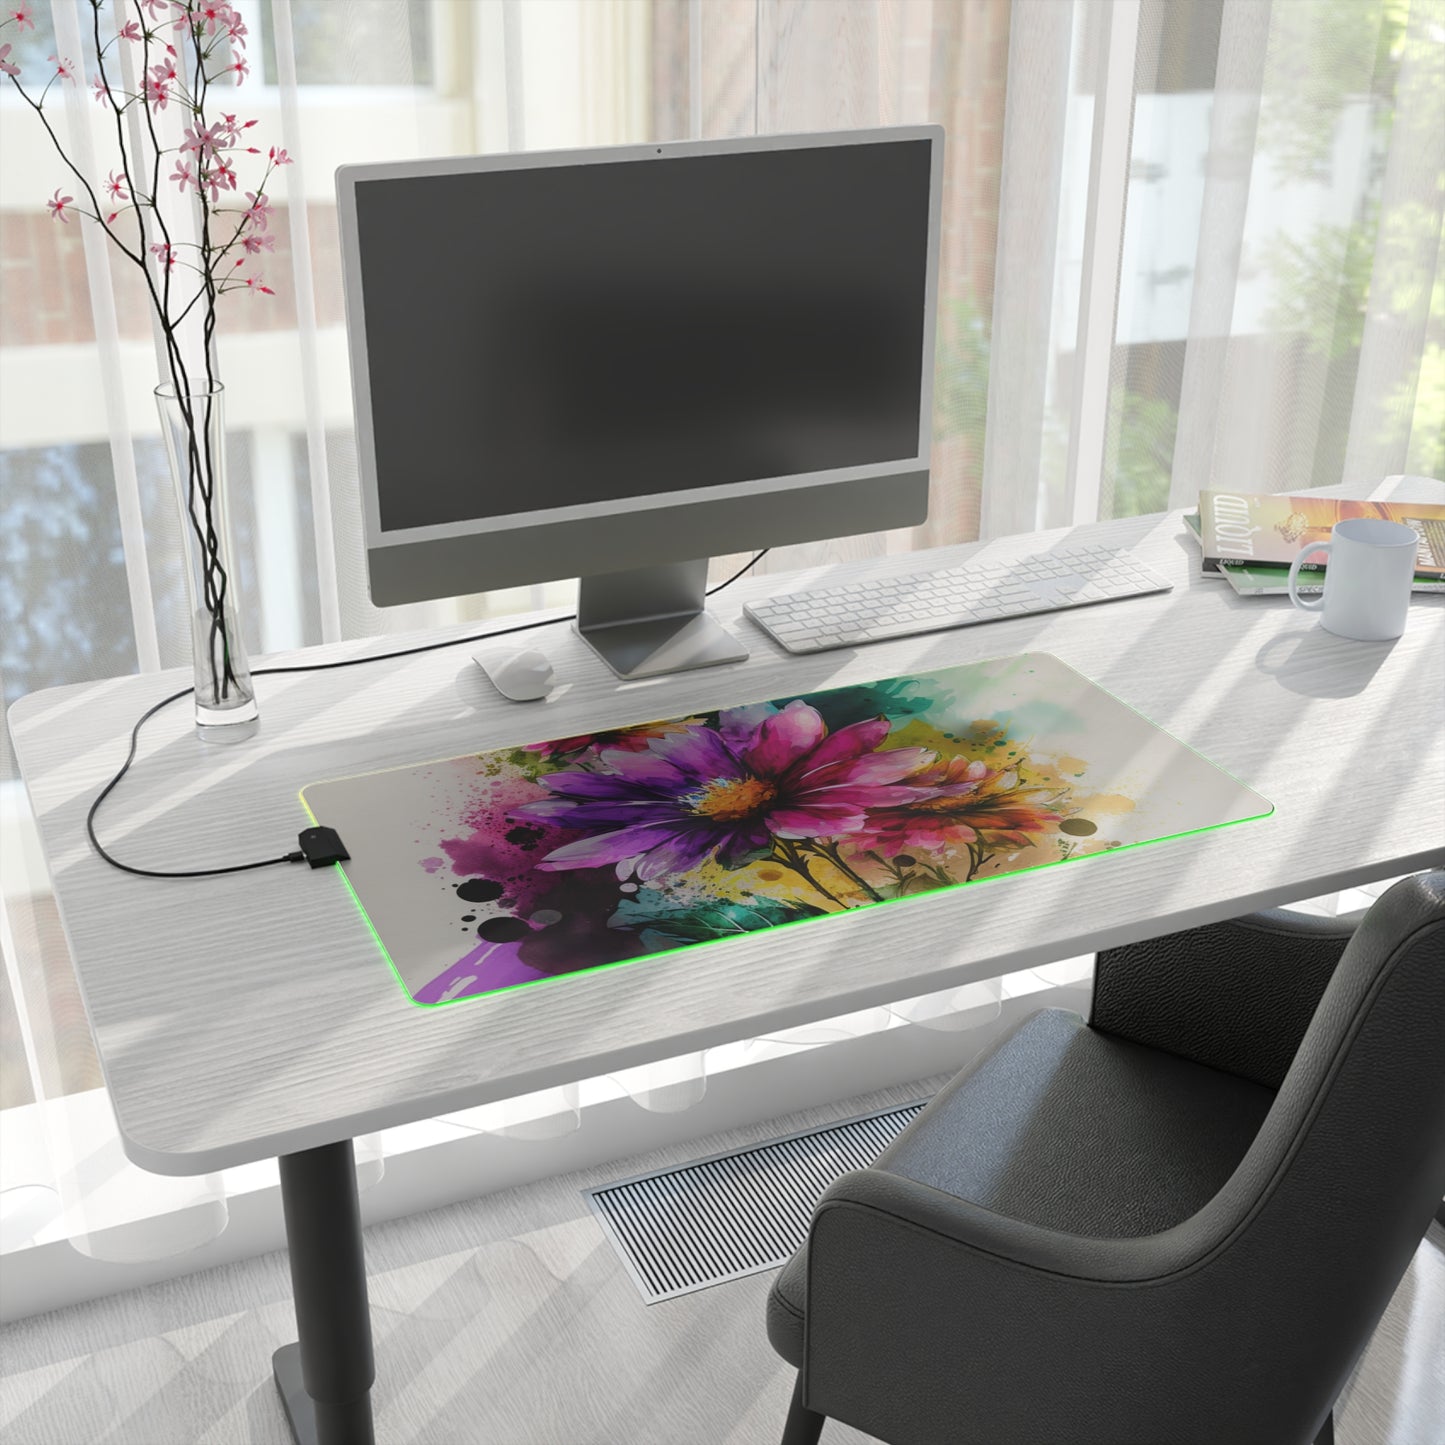 LED Gaming Mouse Pad Bright Spring Flowers 1